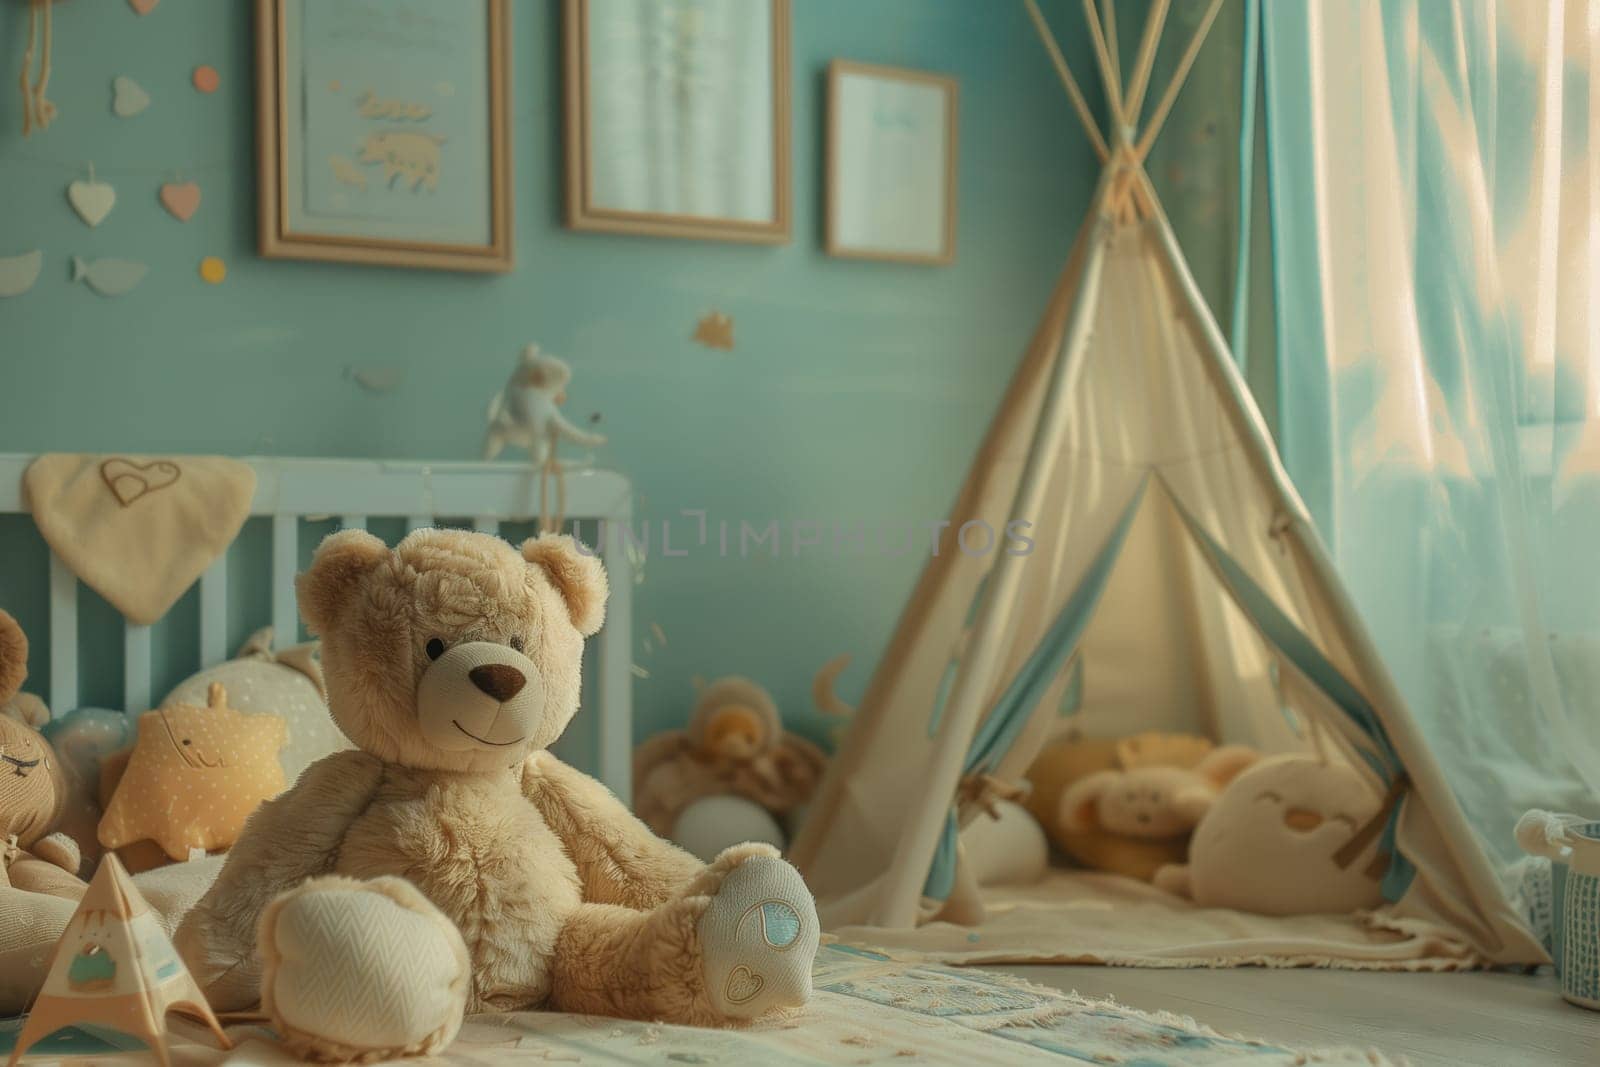 A plush teddy bear rests on a nursery bed beside a teepee, creating a comforting atmosphere with its soft fur. The toy adds a touch of art to the room